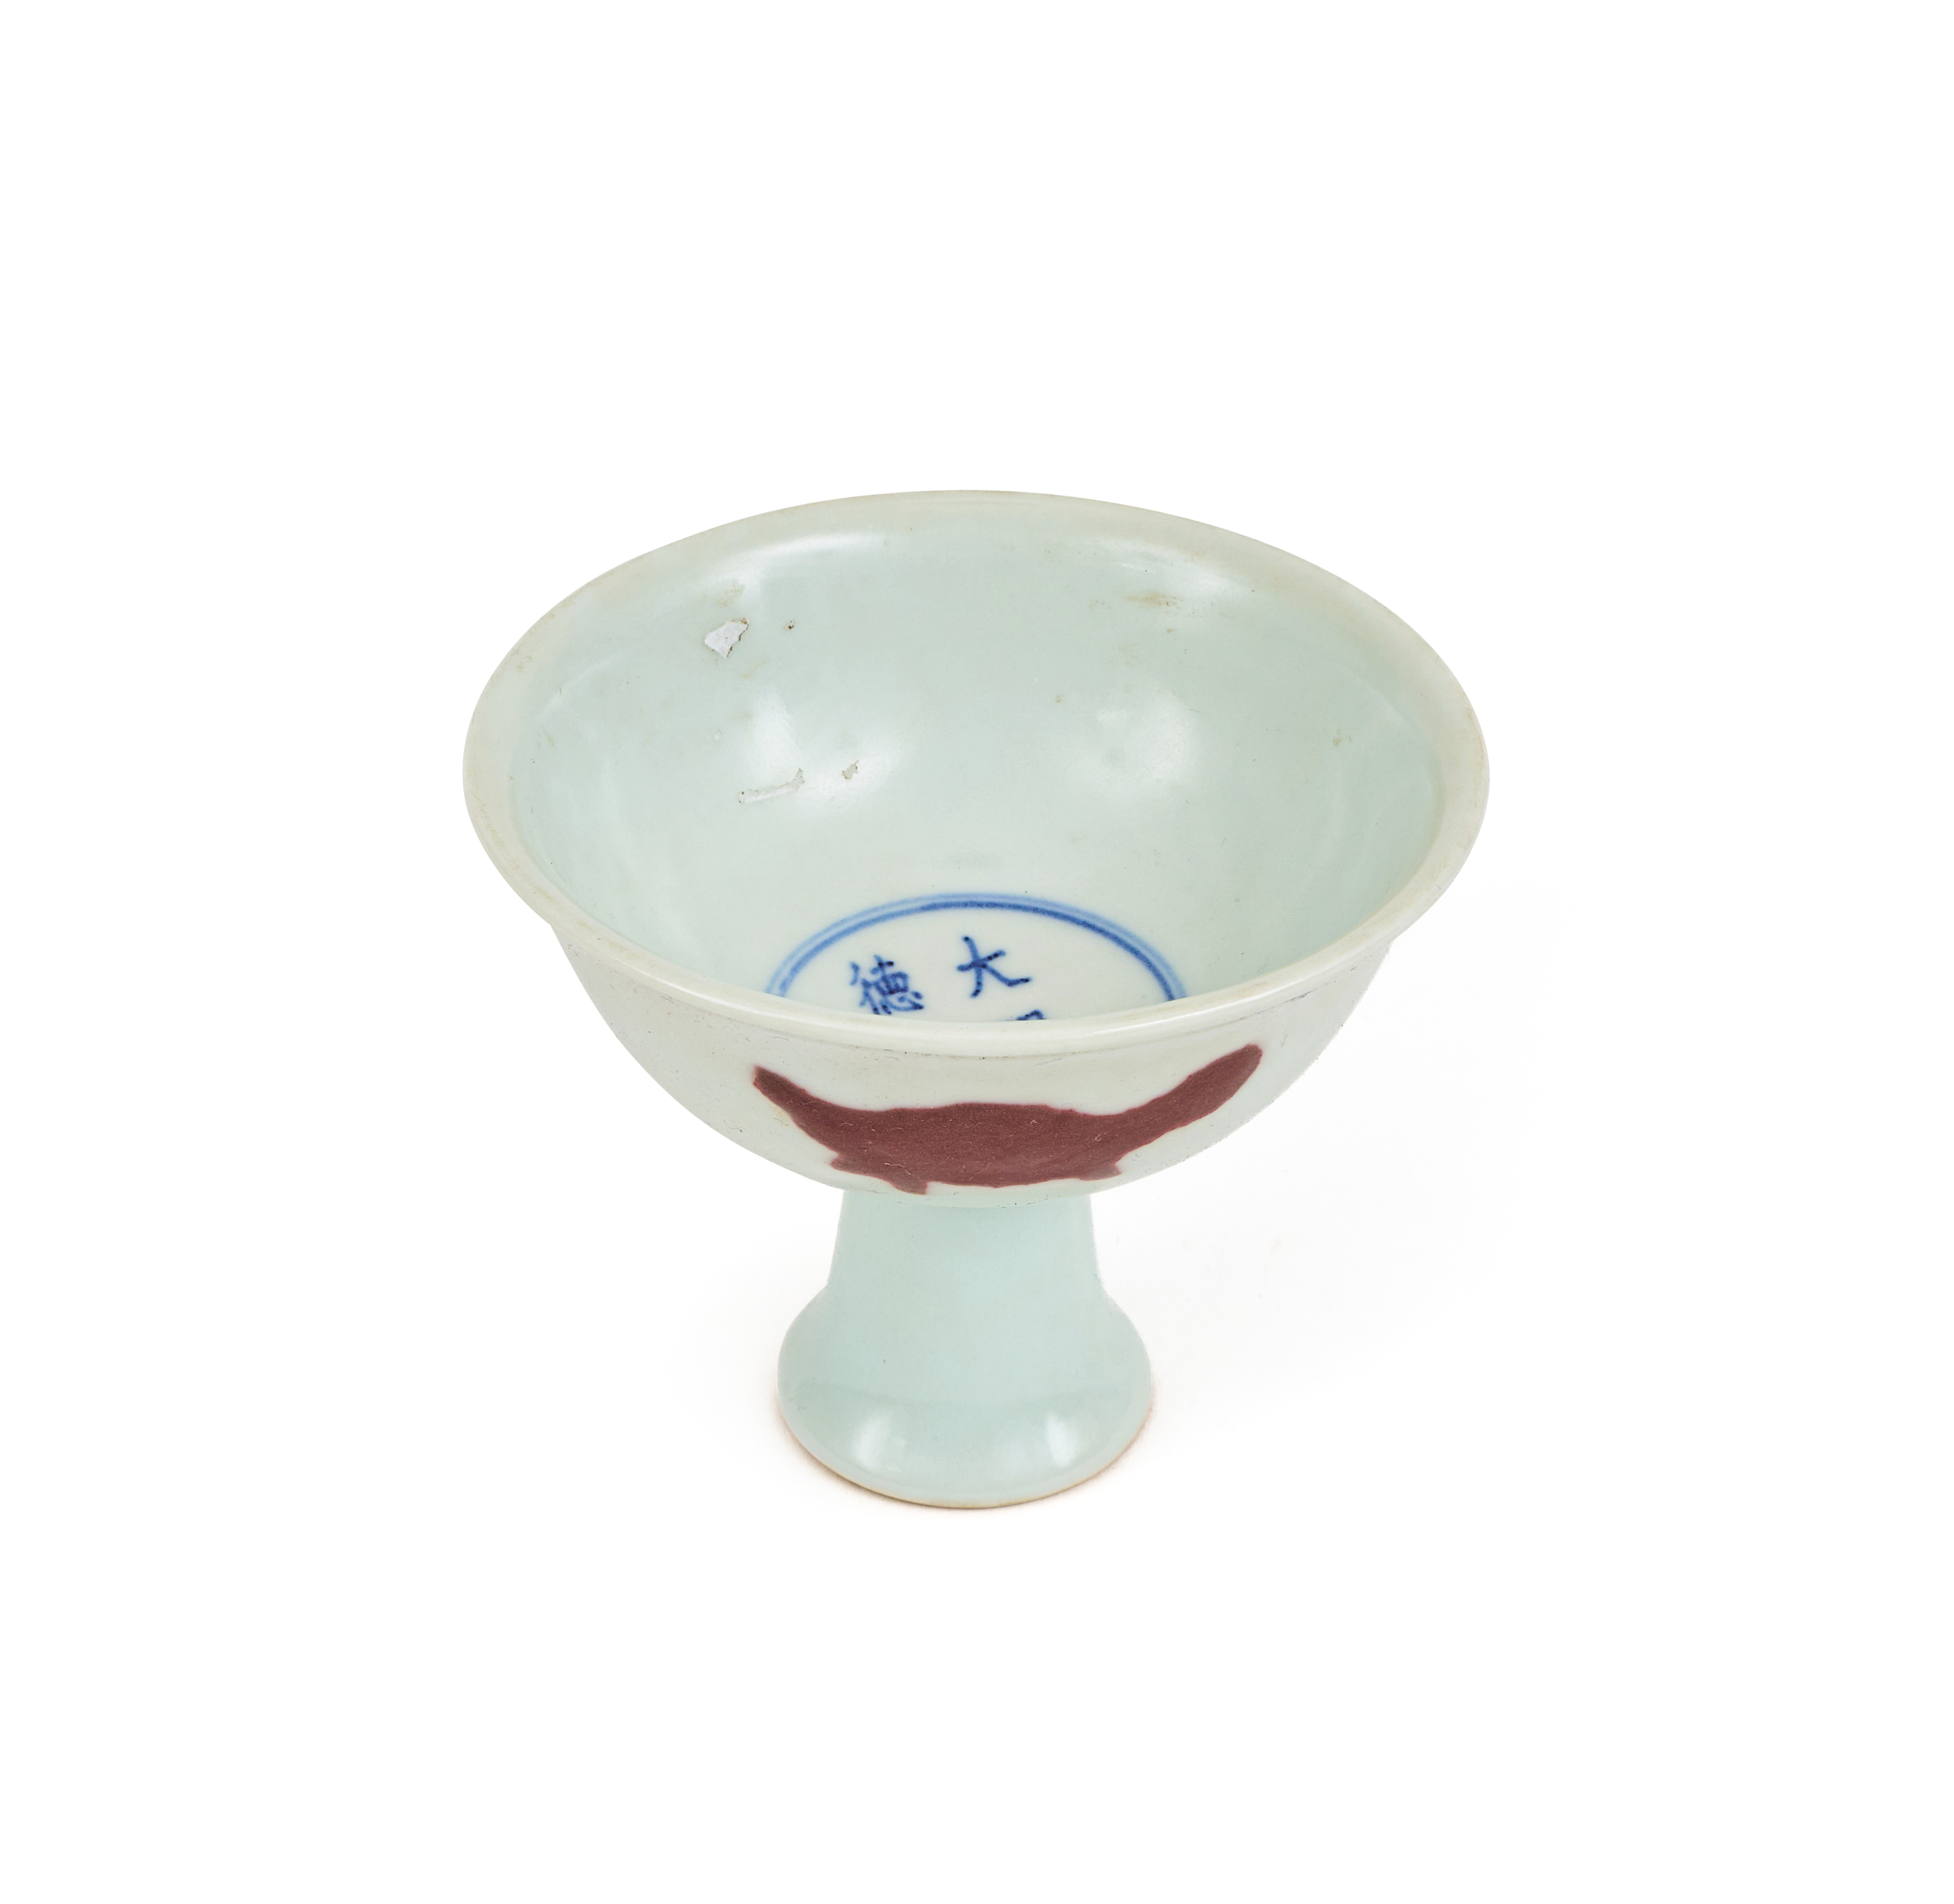 A CHINESE COPPER GLAZED STEM CUP, XUANDE MARK BUT LATER, PROBABLY 19TH CENTURY - Image 2 of 4